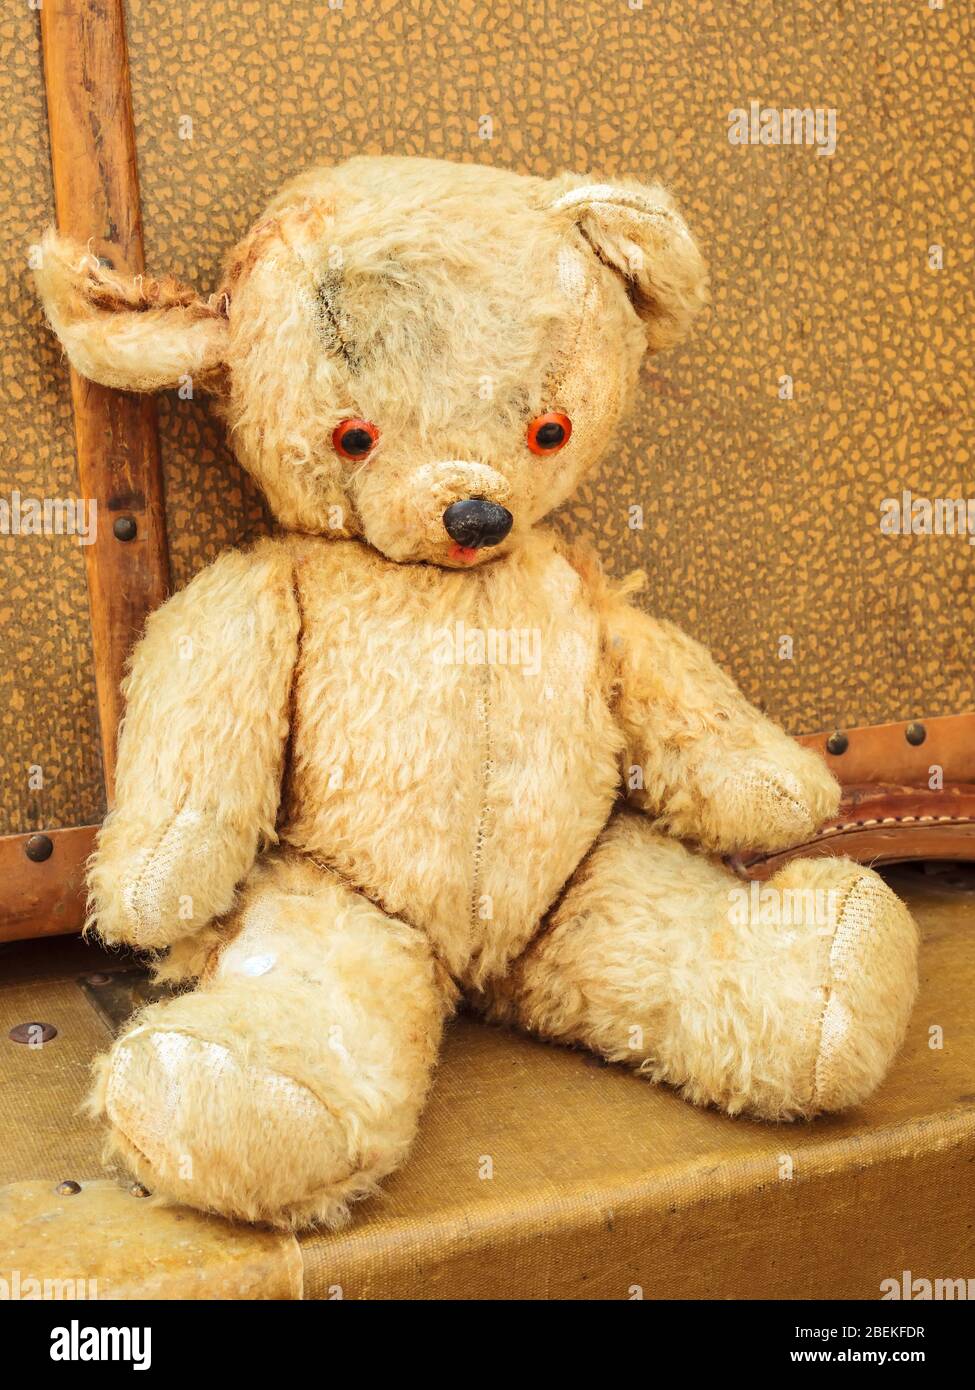 Vintage weathered teddy bear with old suitcases Stock Photo